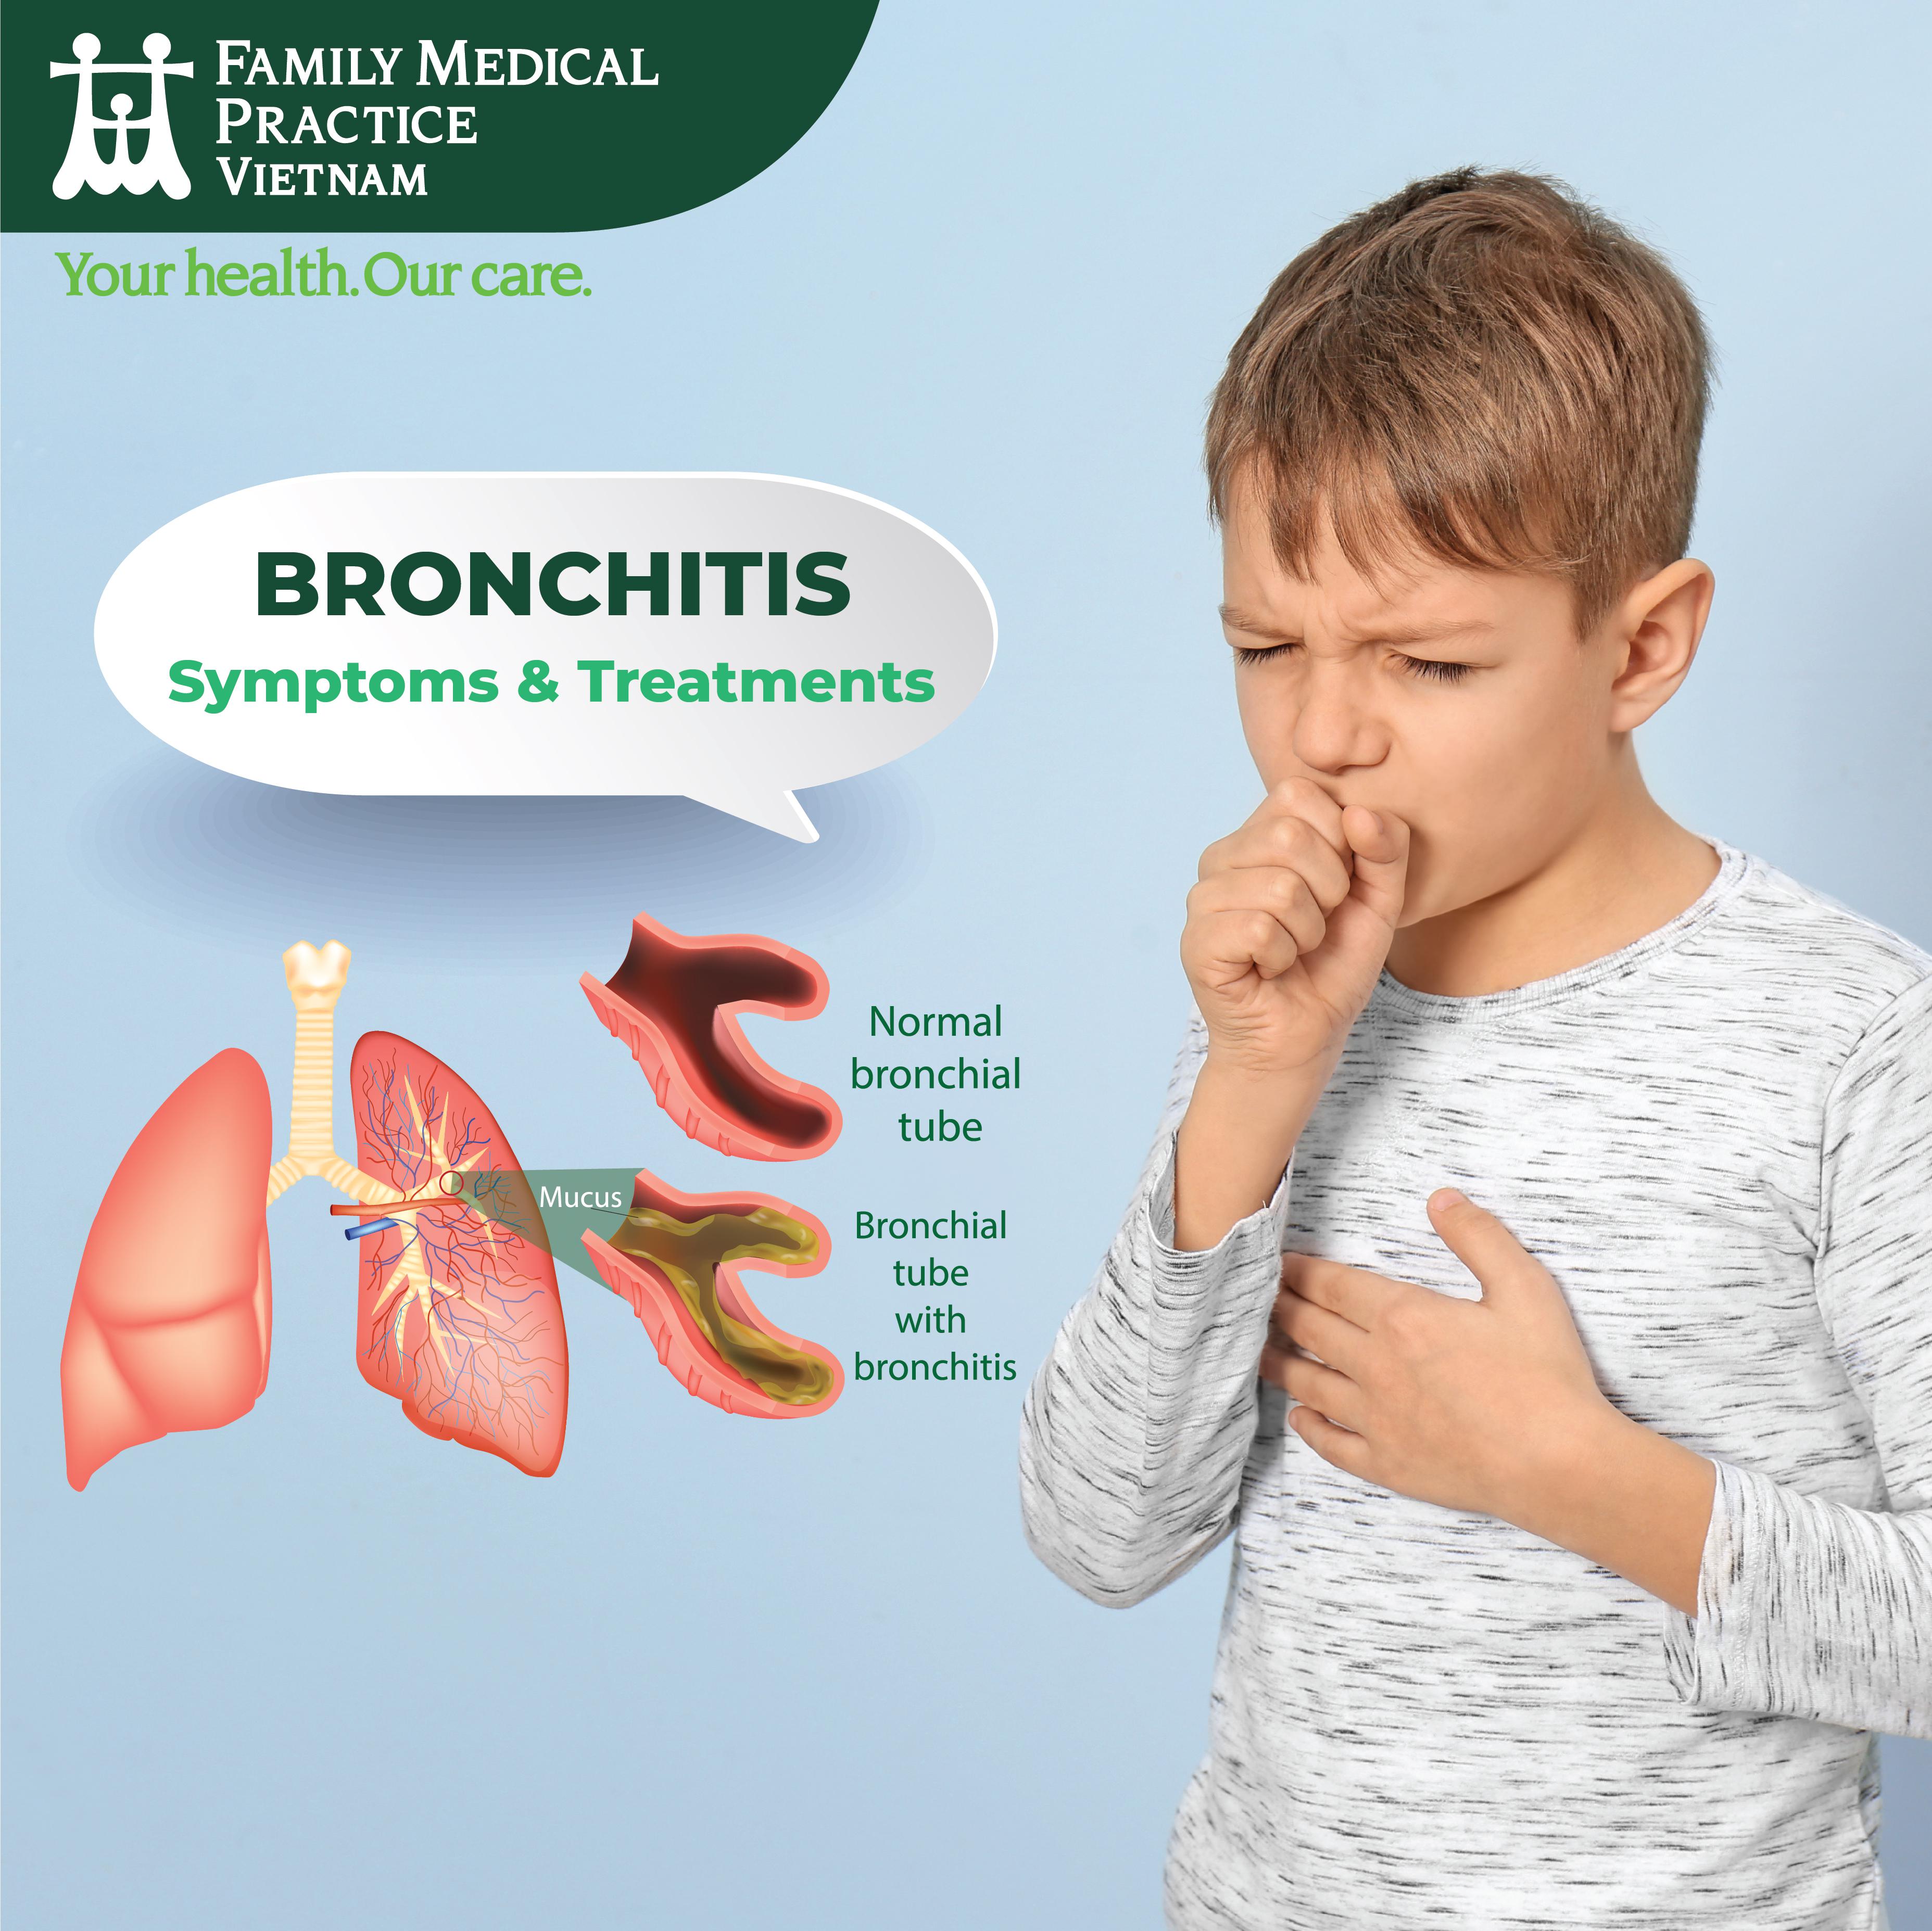 Don't Ignore These Symptoms of Bronchitis in Children! Family Medical